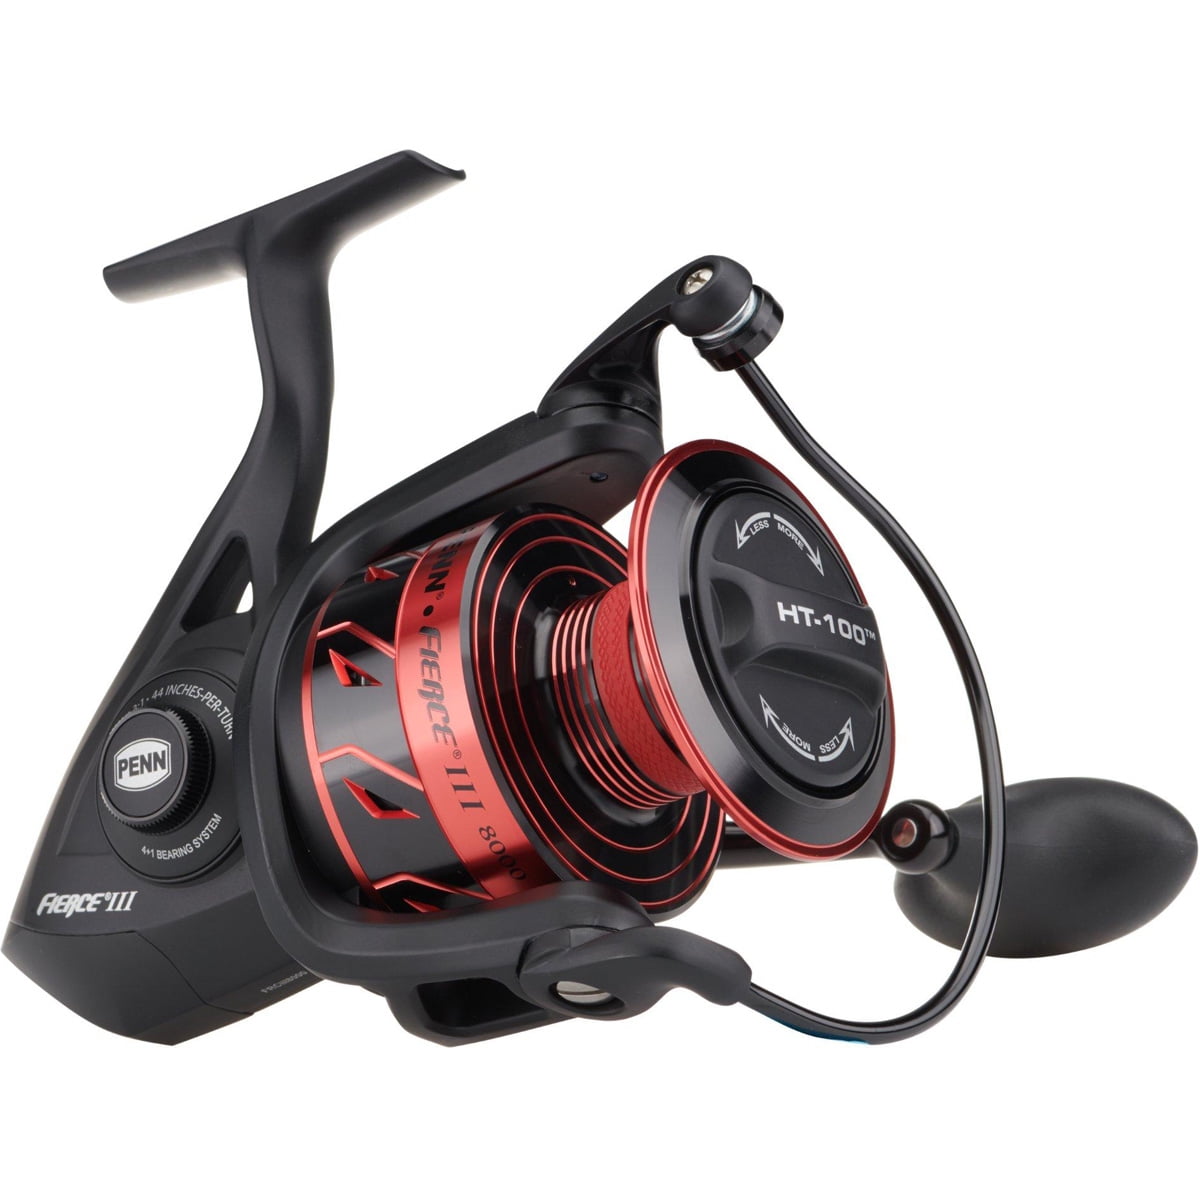 PRO Marine EGS3000 Energy Spin Reel No. 3 - 150M Thread Included